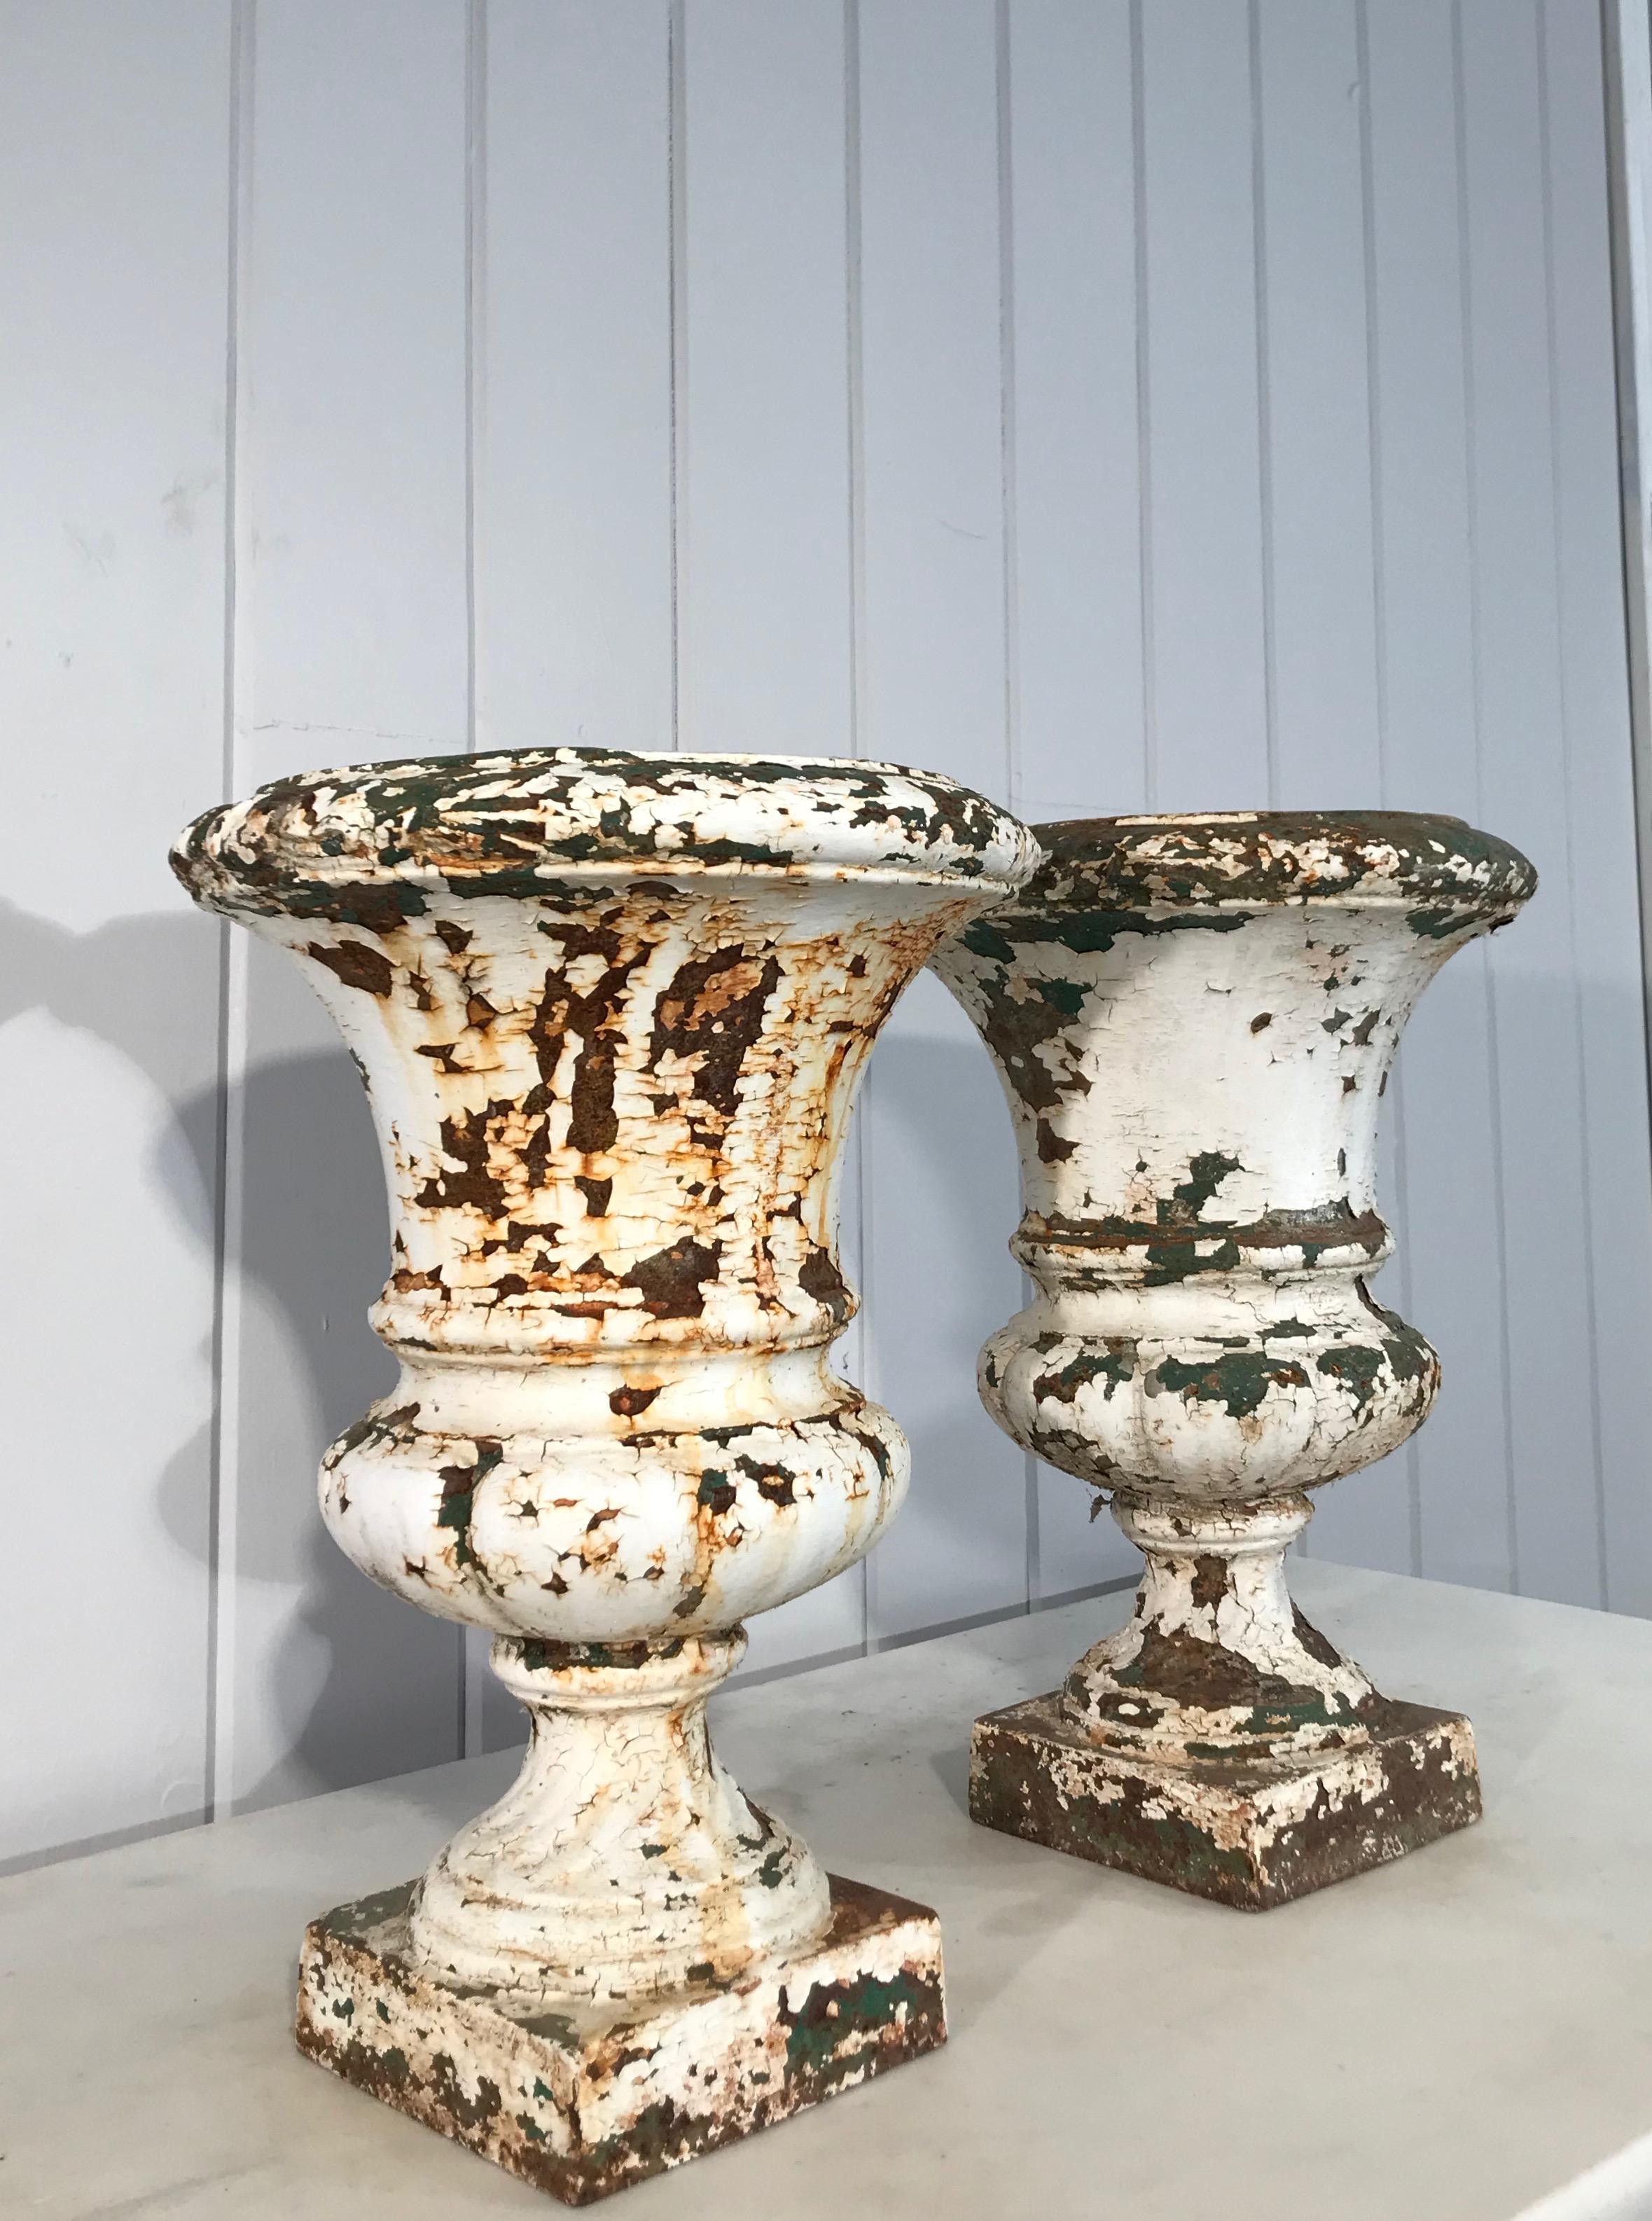 These classical 19th century Medici urns have a killer form and surface and are in perfect condition. They would be fabulous potted up with bulbs or lavender and placed on your dining table, inside or out, for year-round enjoyment. There is a unique